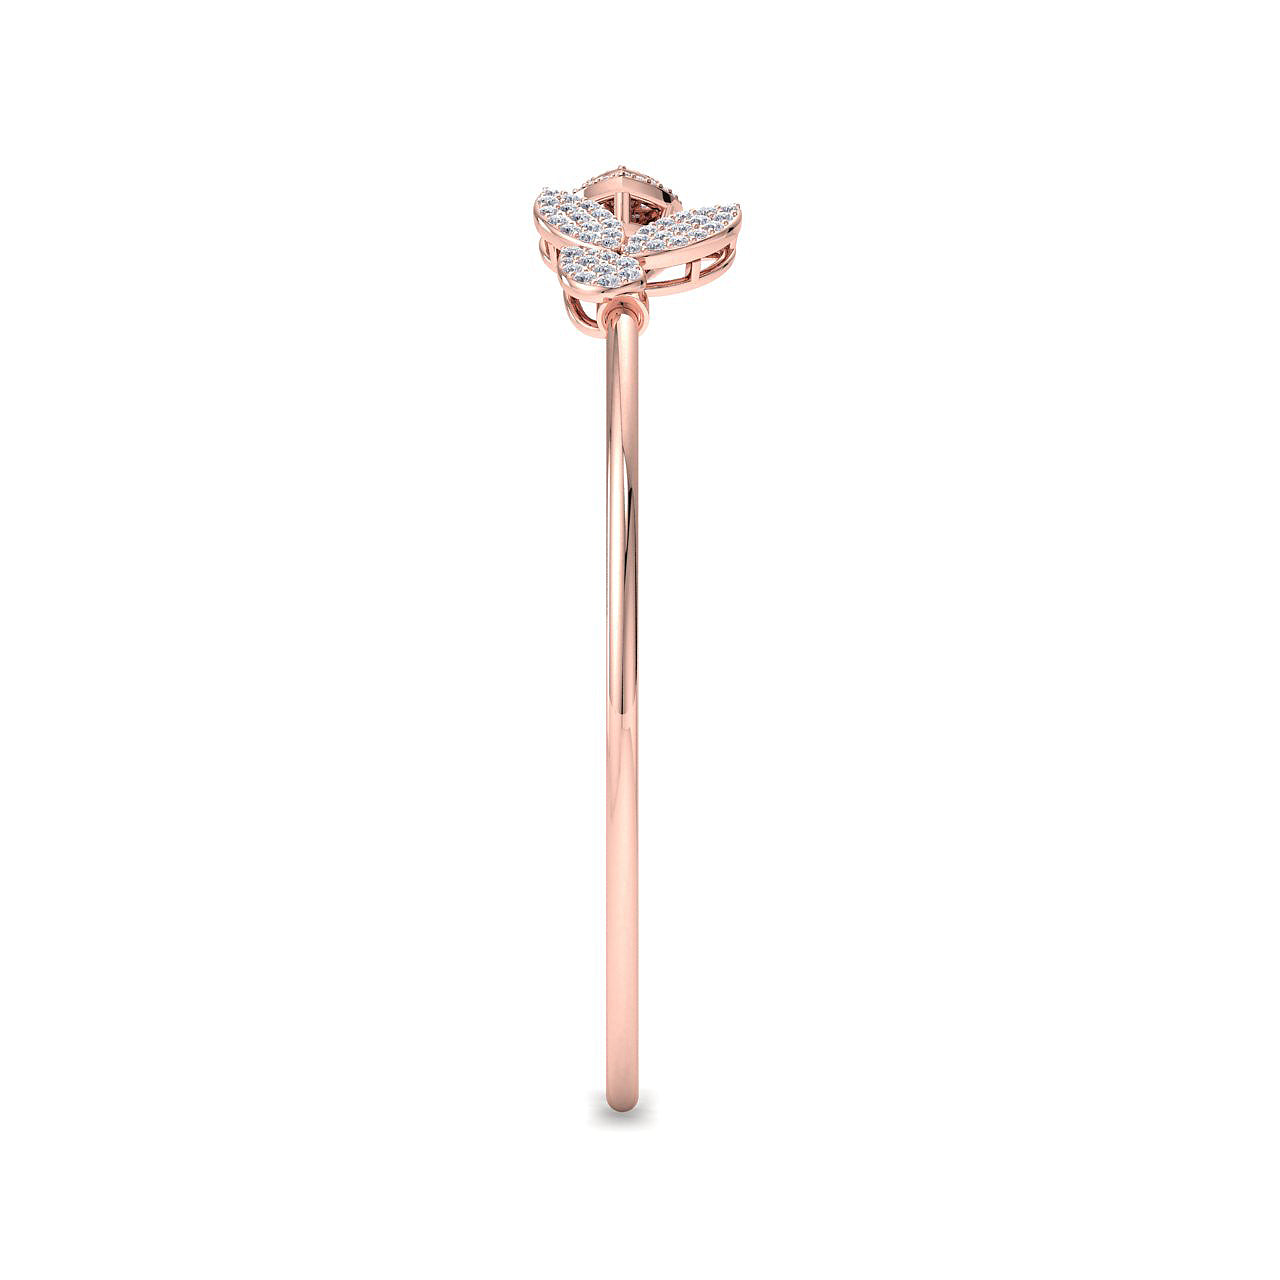 Bracelet in rose gold with white diamonds of 0.68 ct in weight